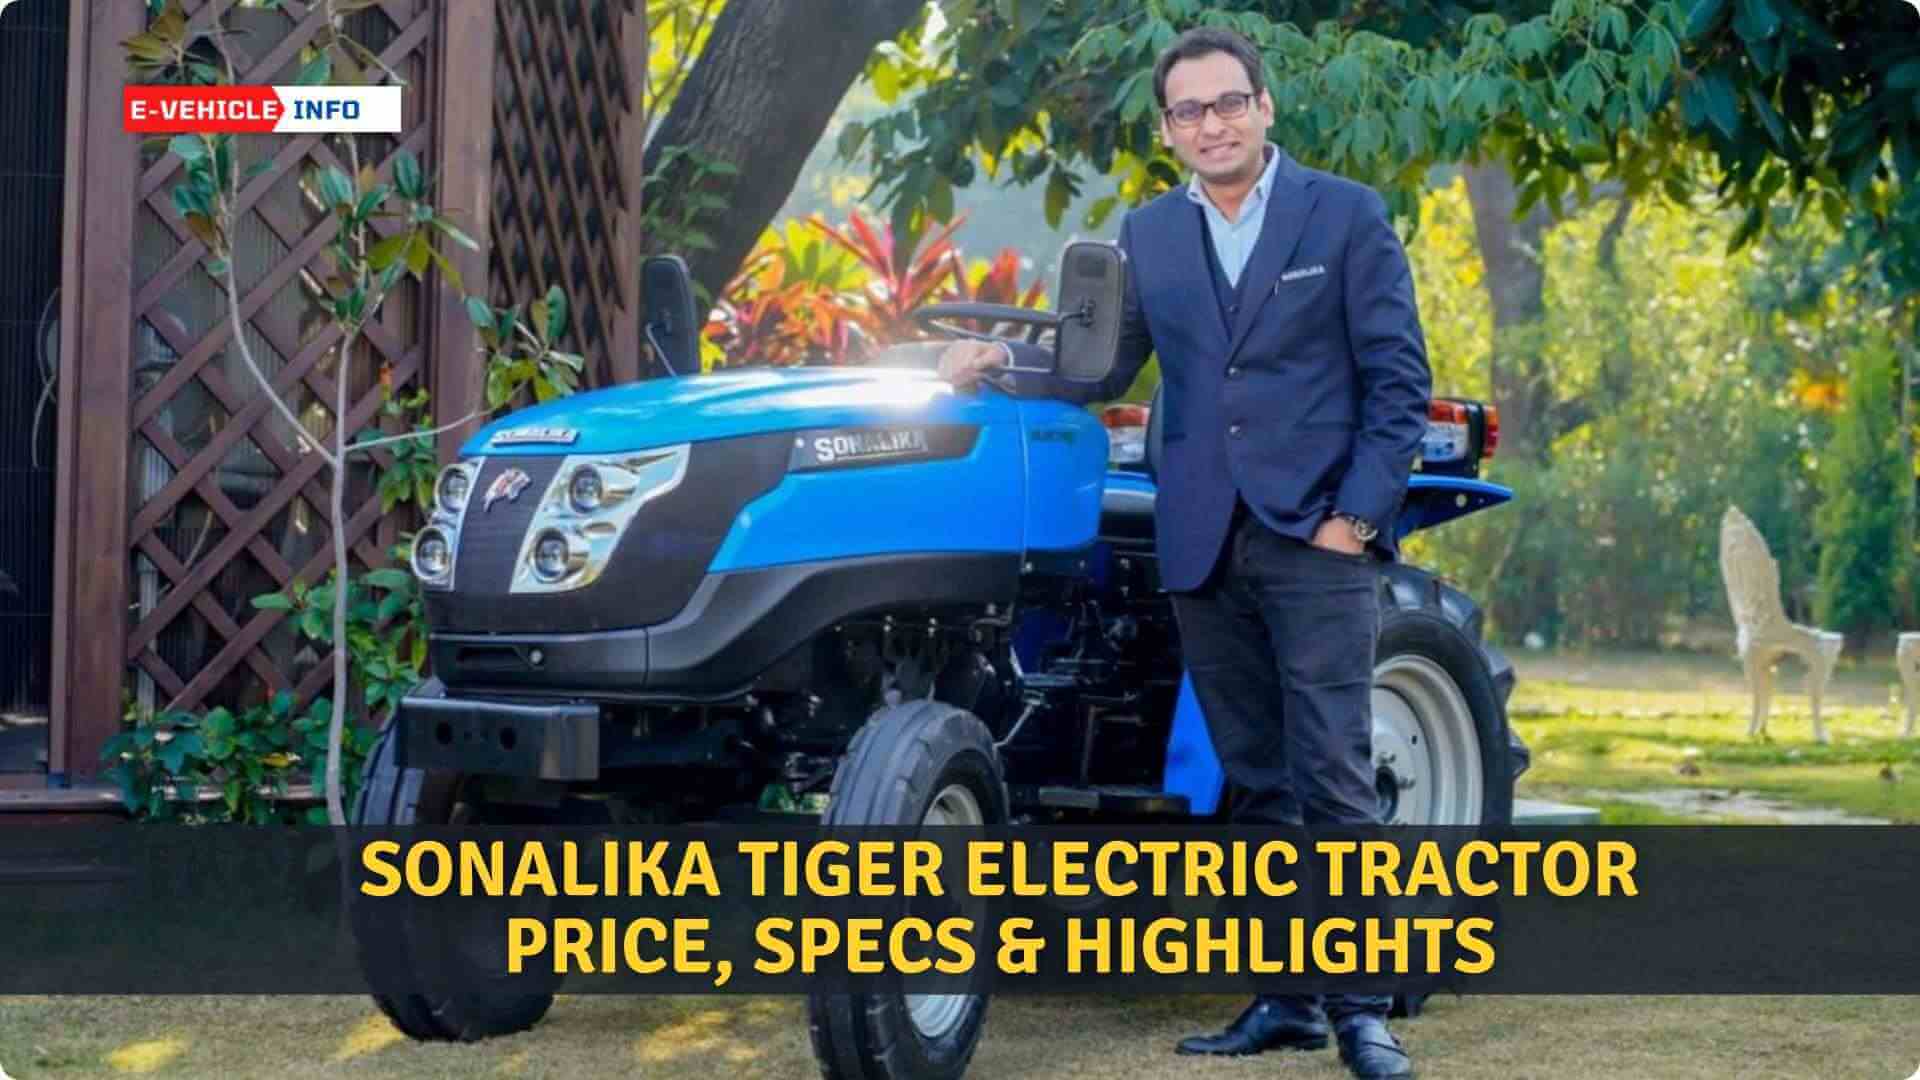 https://e-vehicleinfo.com/sonalika-tiger-electric-tractor-price-specs-highlights/